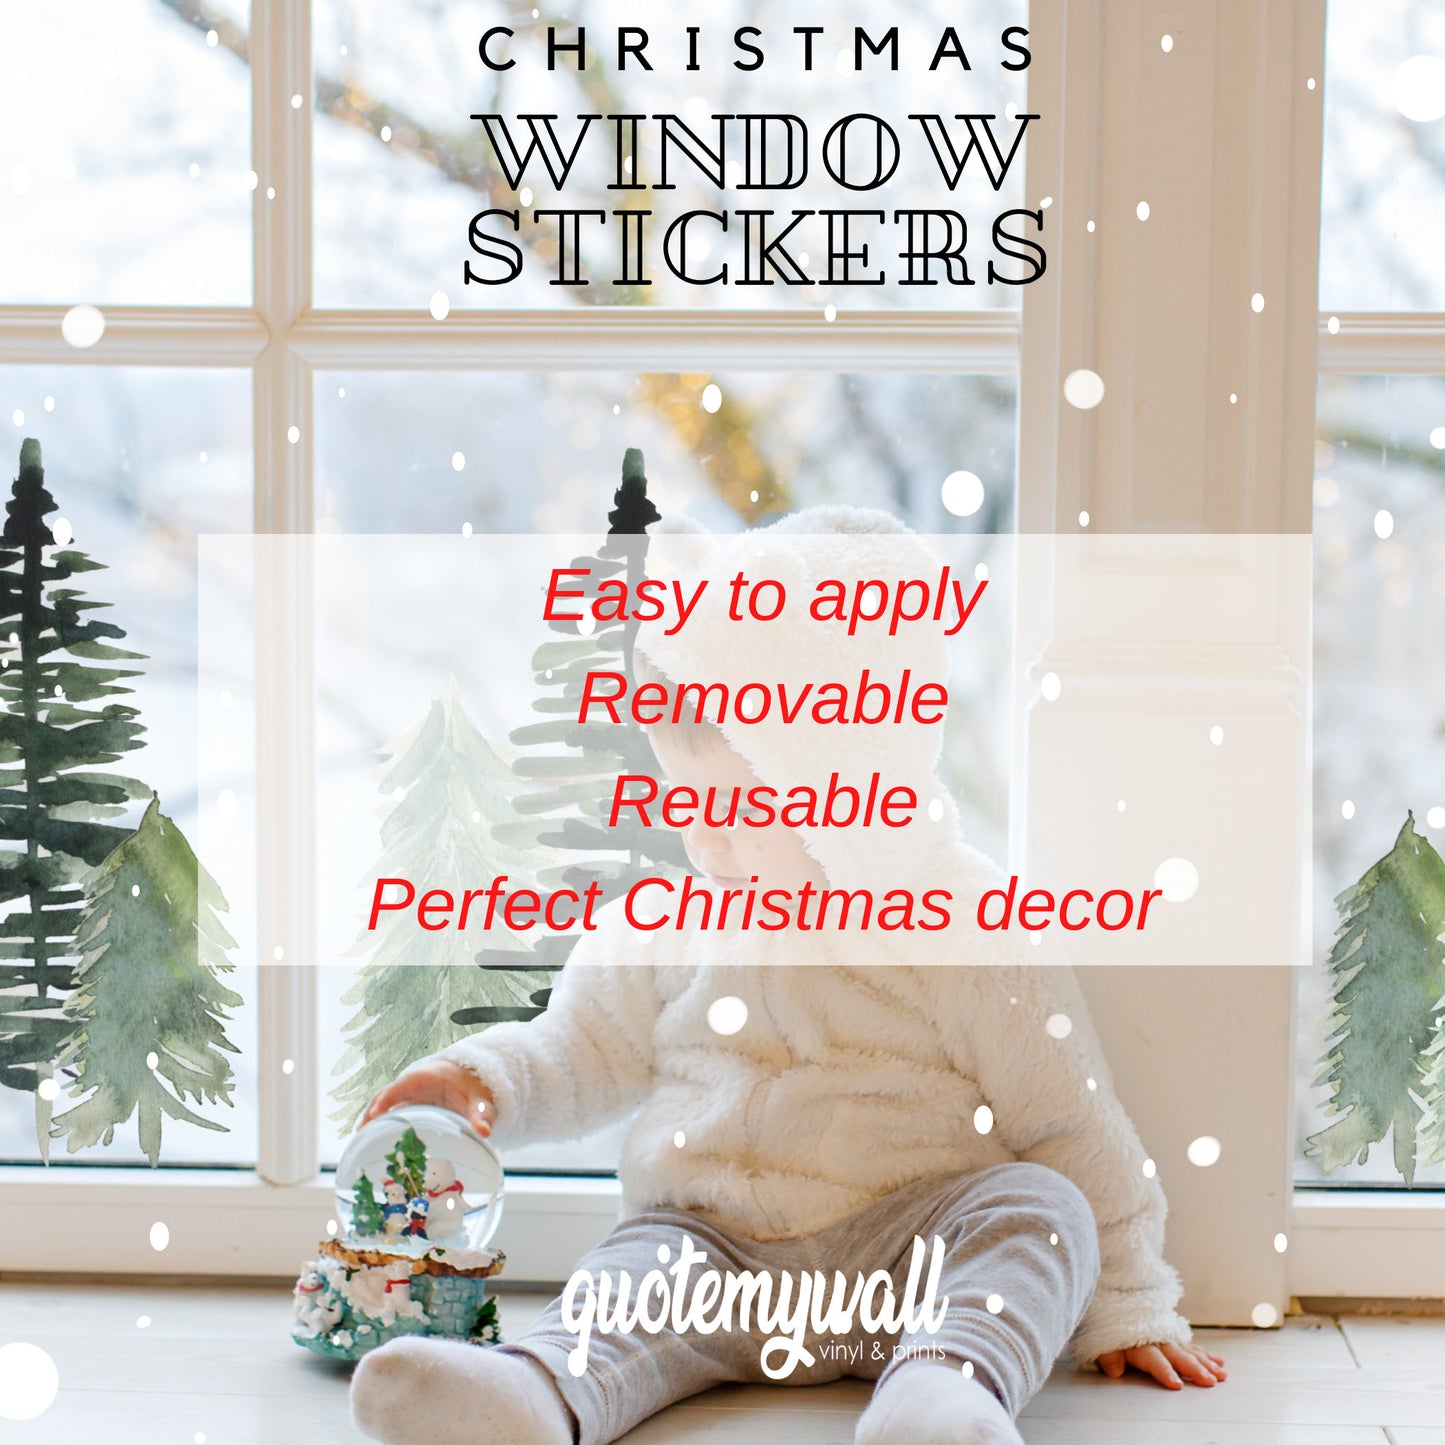 Decorative Christmas Trees And Buntings Christmas Window Decal Stickers